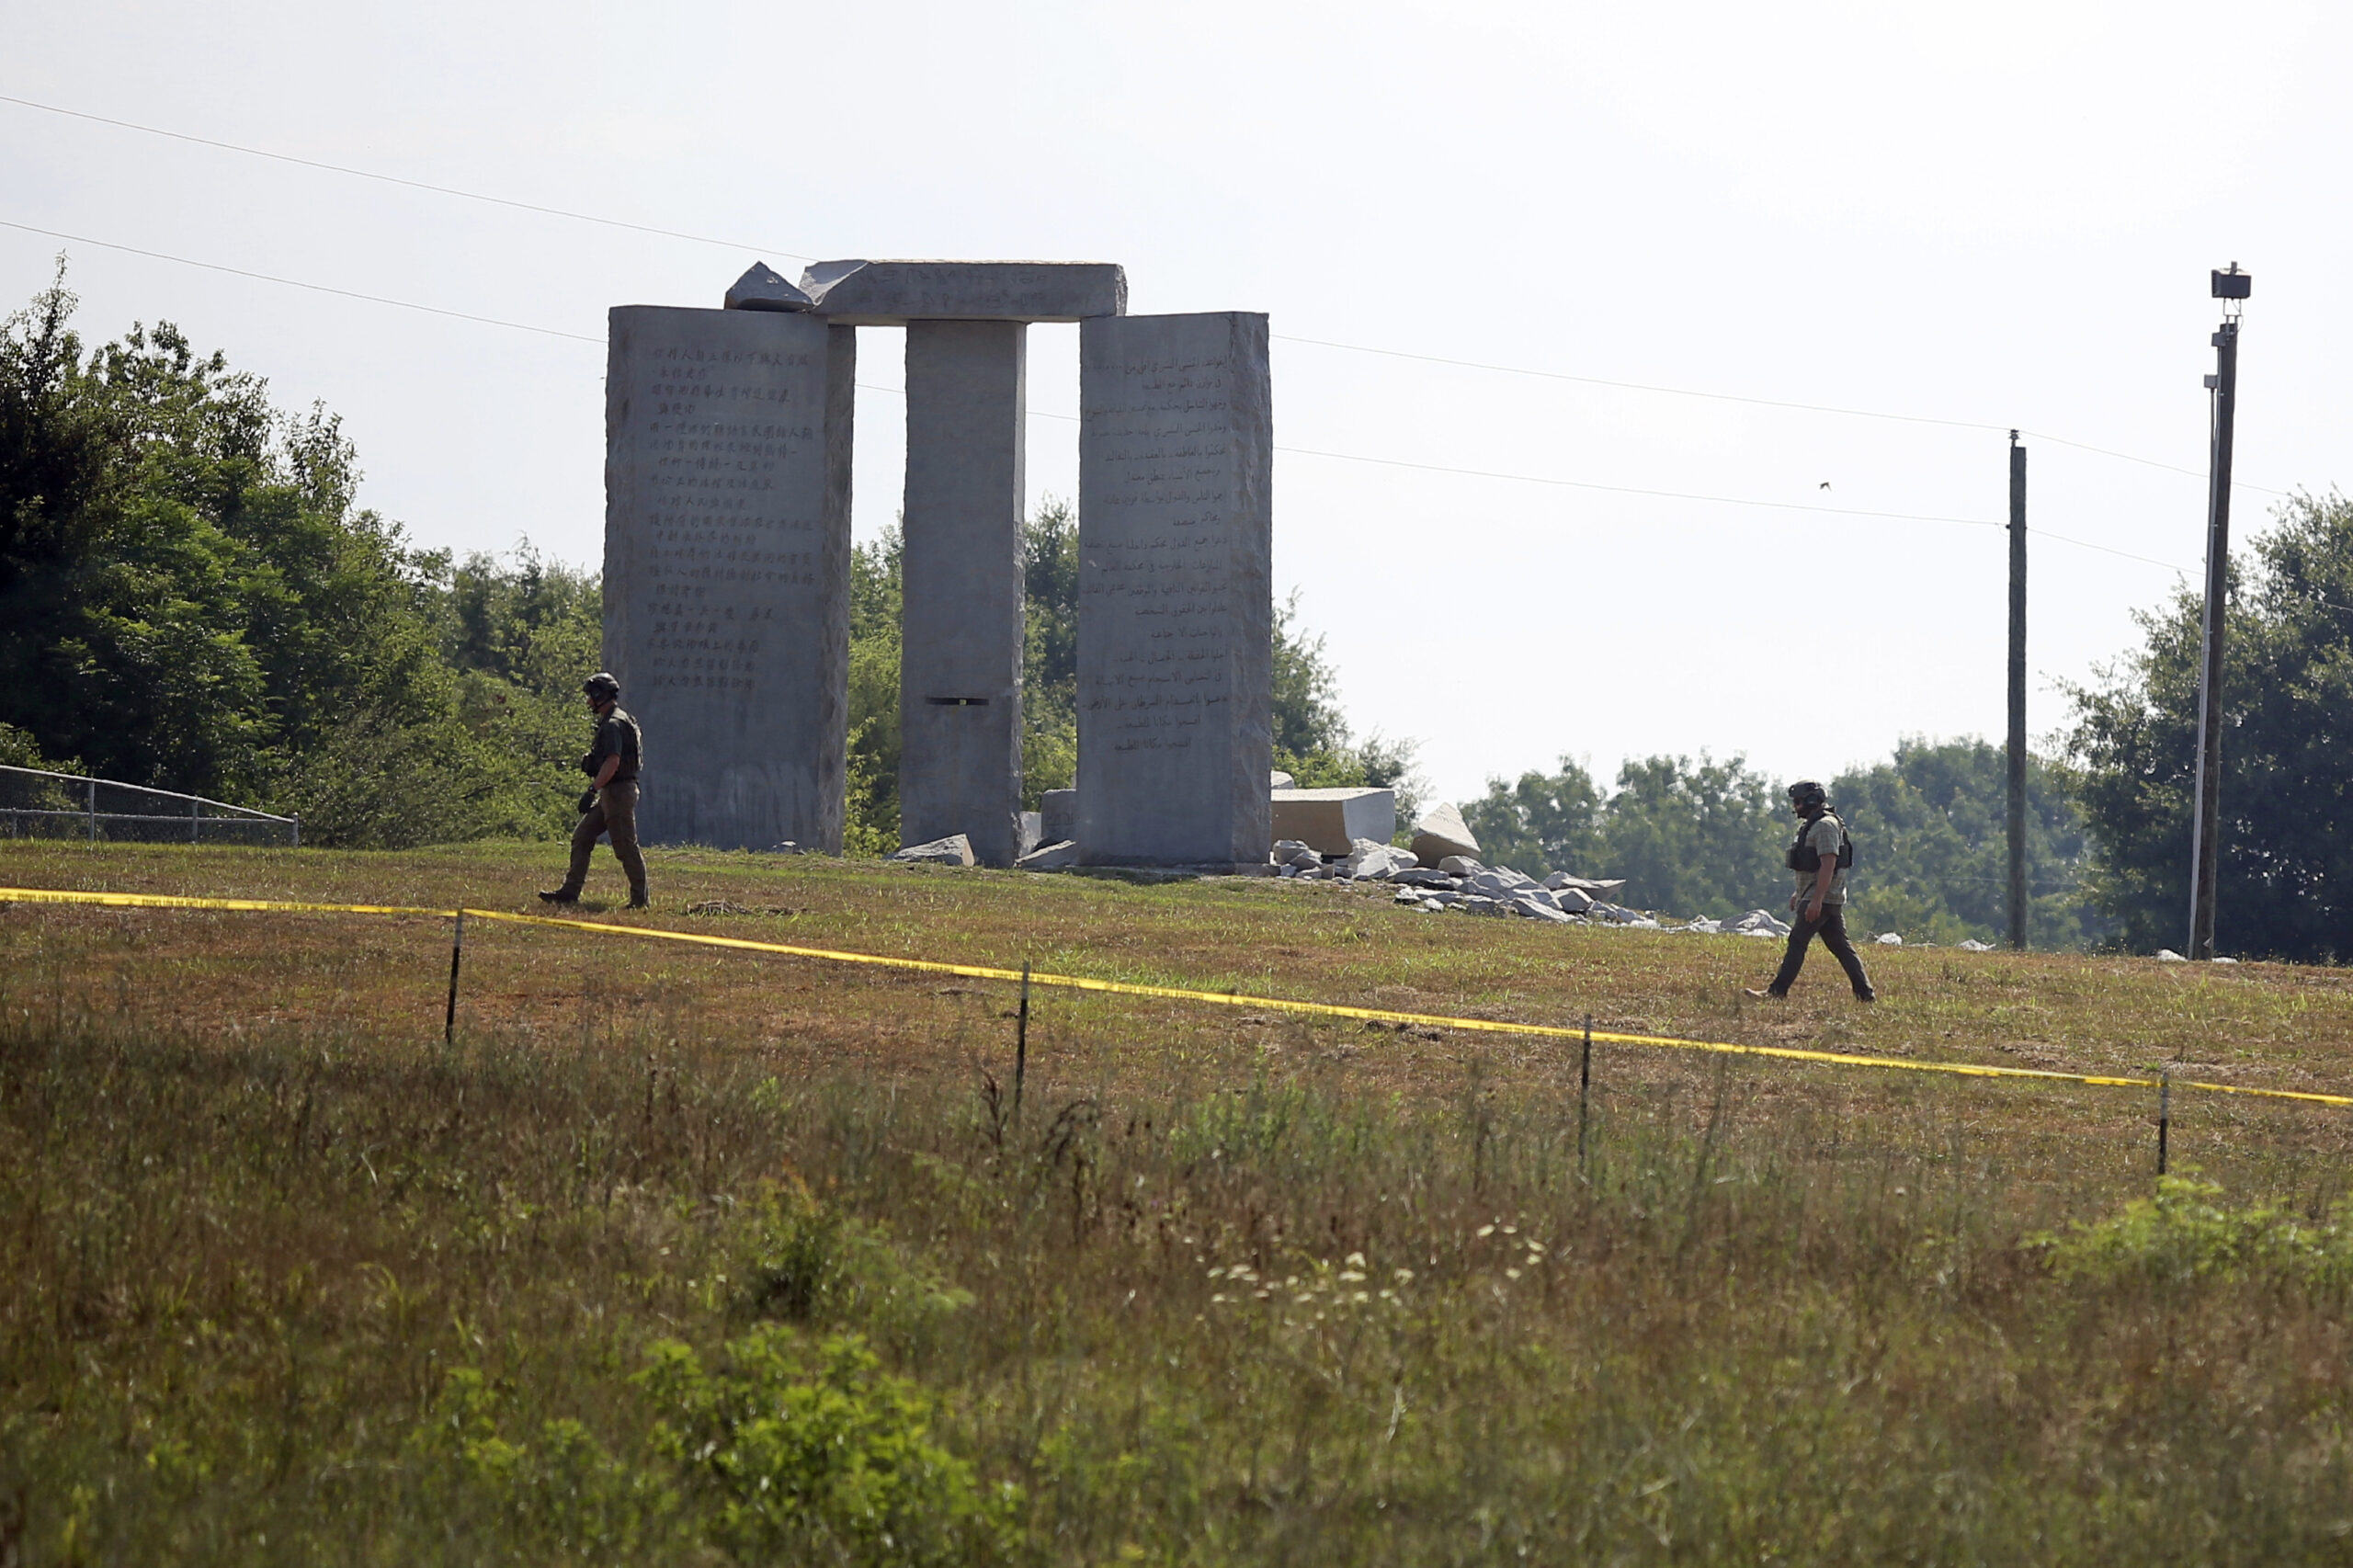 Law enforcement officials walk around the damaged Georgia Guidestones monument near Elberton, Ga., on Wednesday, July 6, 2022. The Georgia Bureau of Investigation said the monument, which some Christians regard as satanic, was damaged by an explosion before dawn. (Rose Scoggins/The Elberton Star via AP)